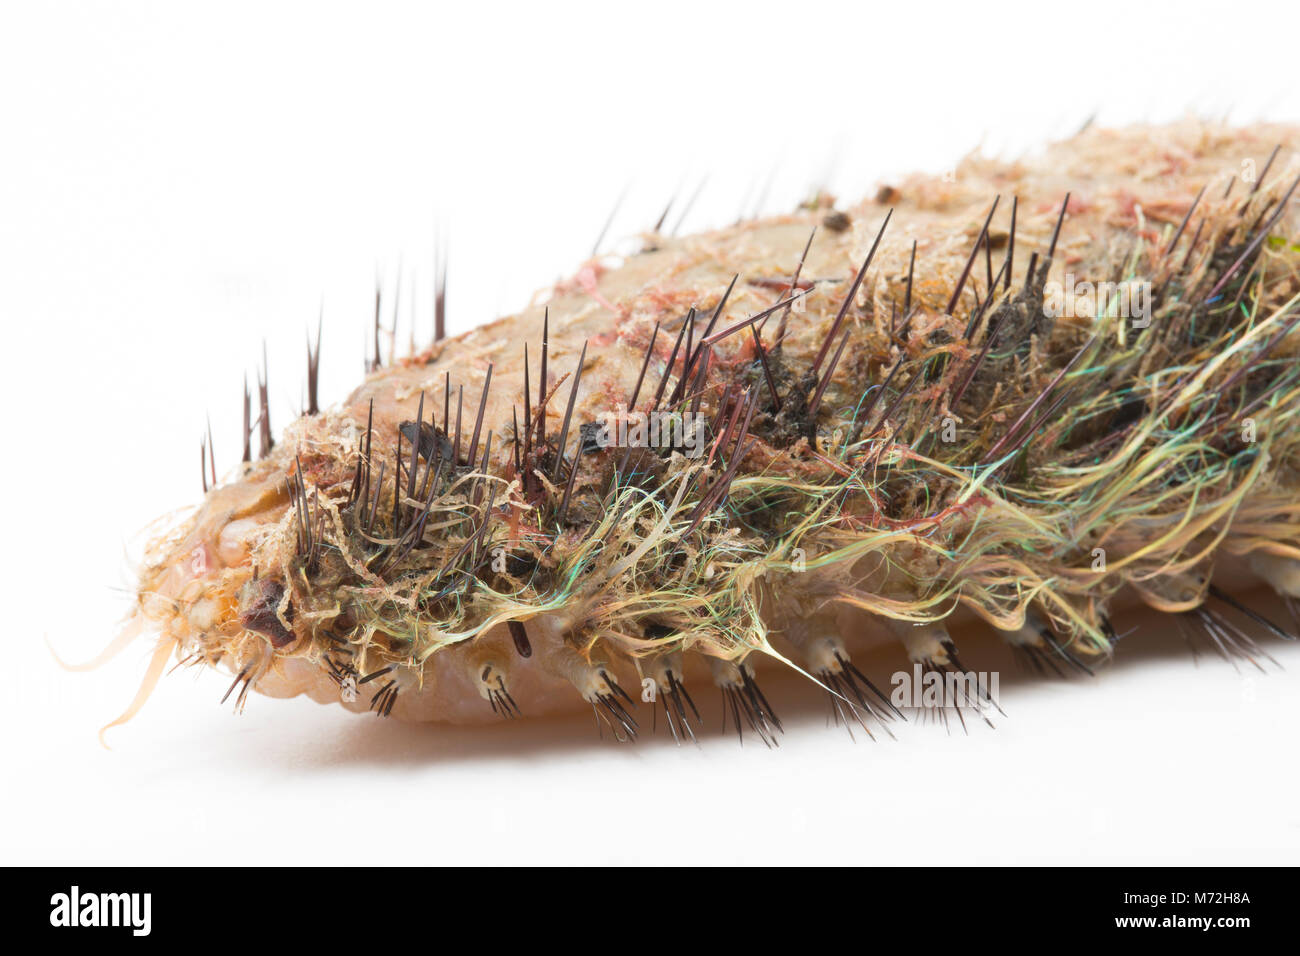 A sea mouse-Aphrodita aculeata washed up following storm Emma March 7 2018. The sea mouse is a type of marine worm. Studland Dorset UK GB Stock Photo